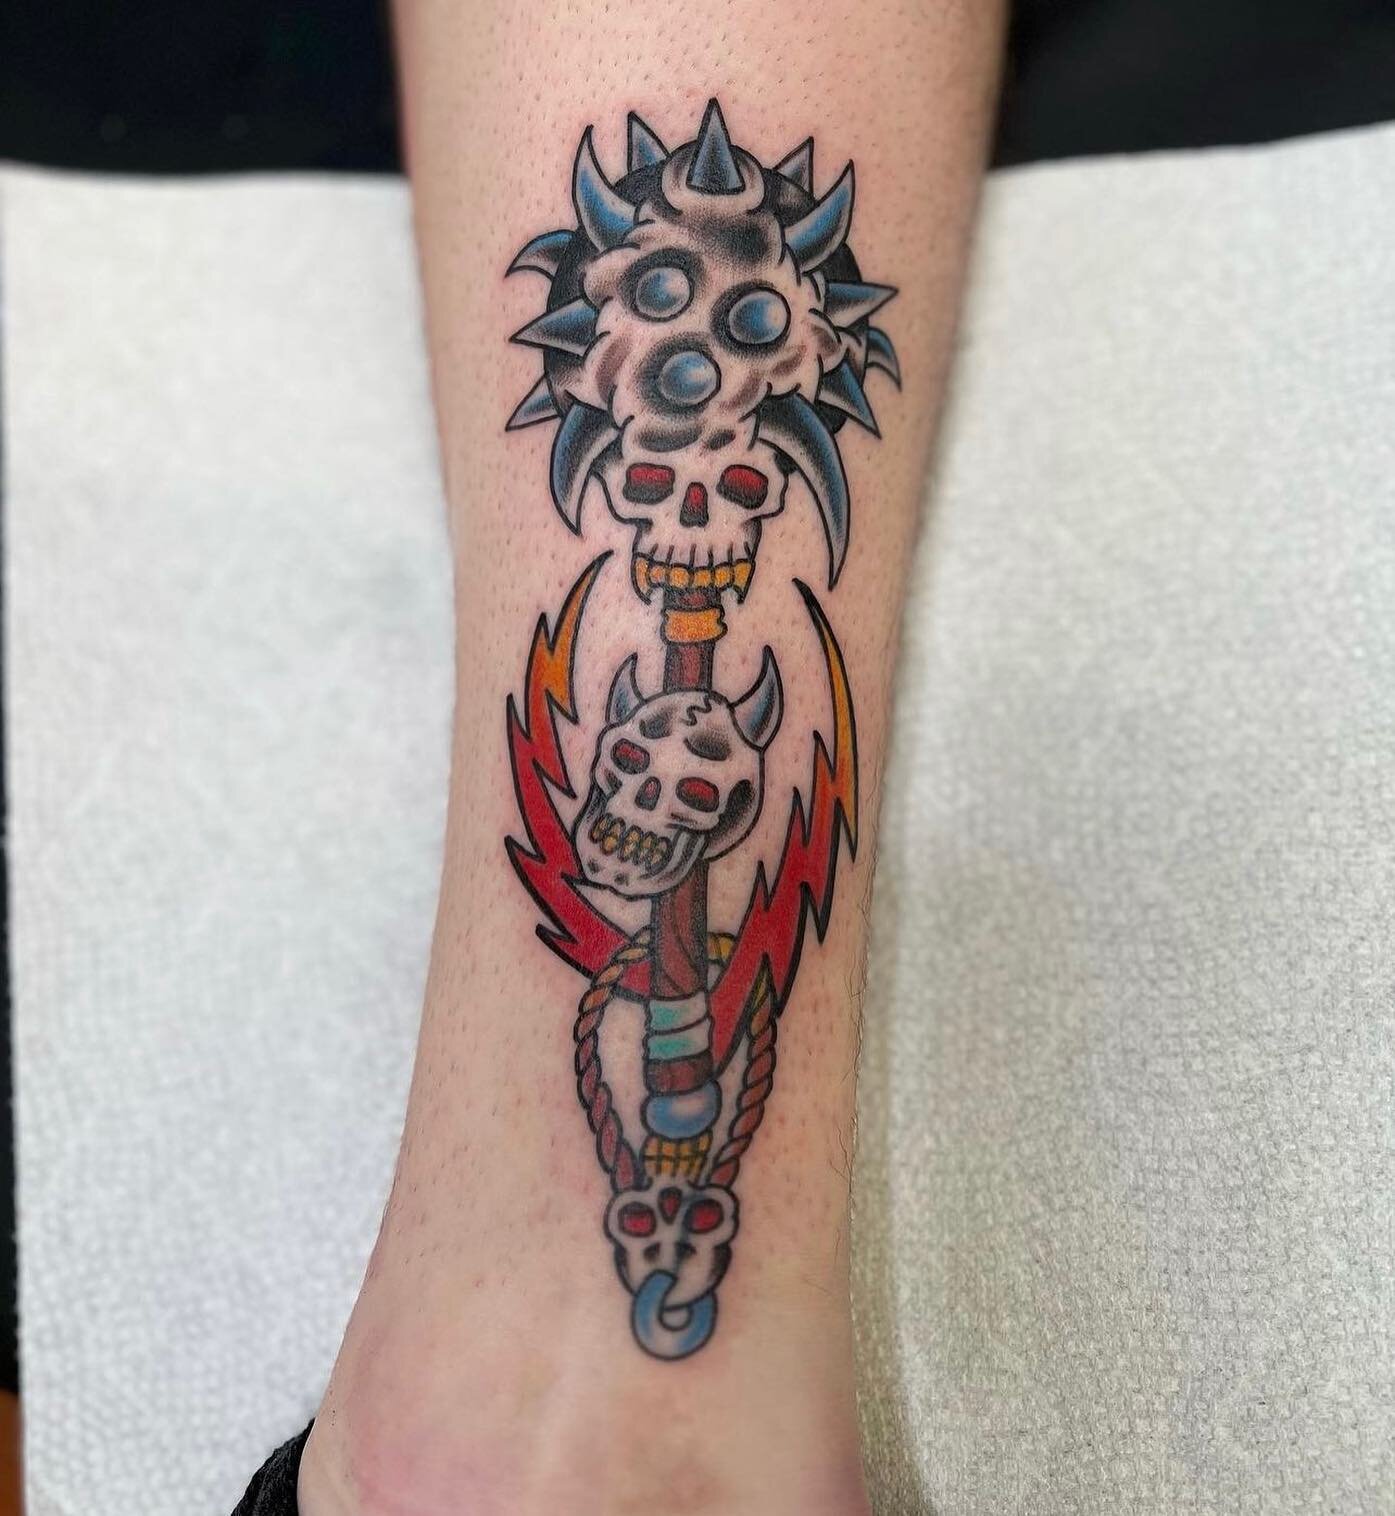 This mace tattoo is tough as nails ☠️ 
Done by @stevenleetattoos
Taking walk-ins 12-8! First come, first served!